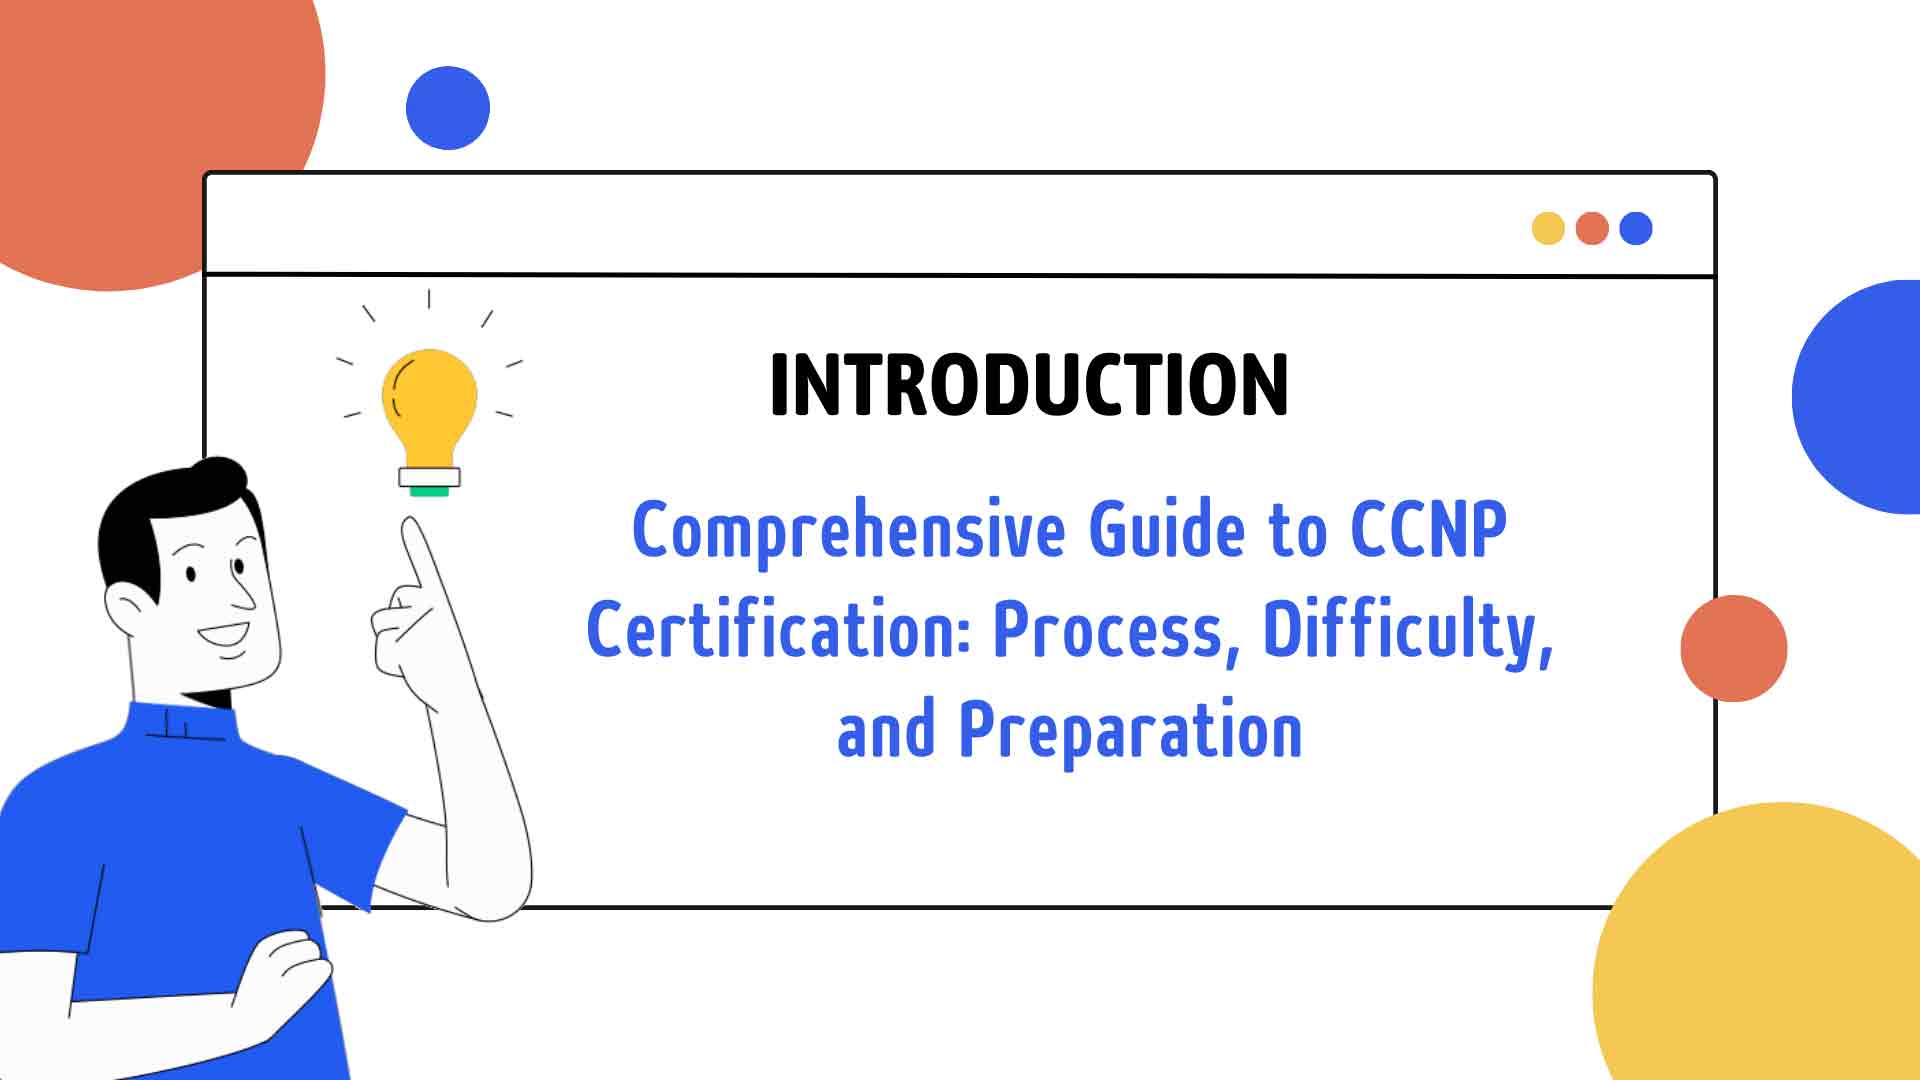 CCNP Certification: Process, Difficulty, and Preparation